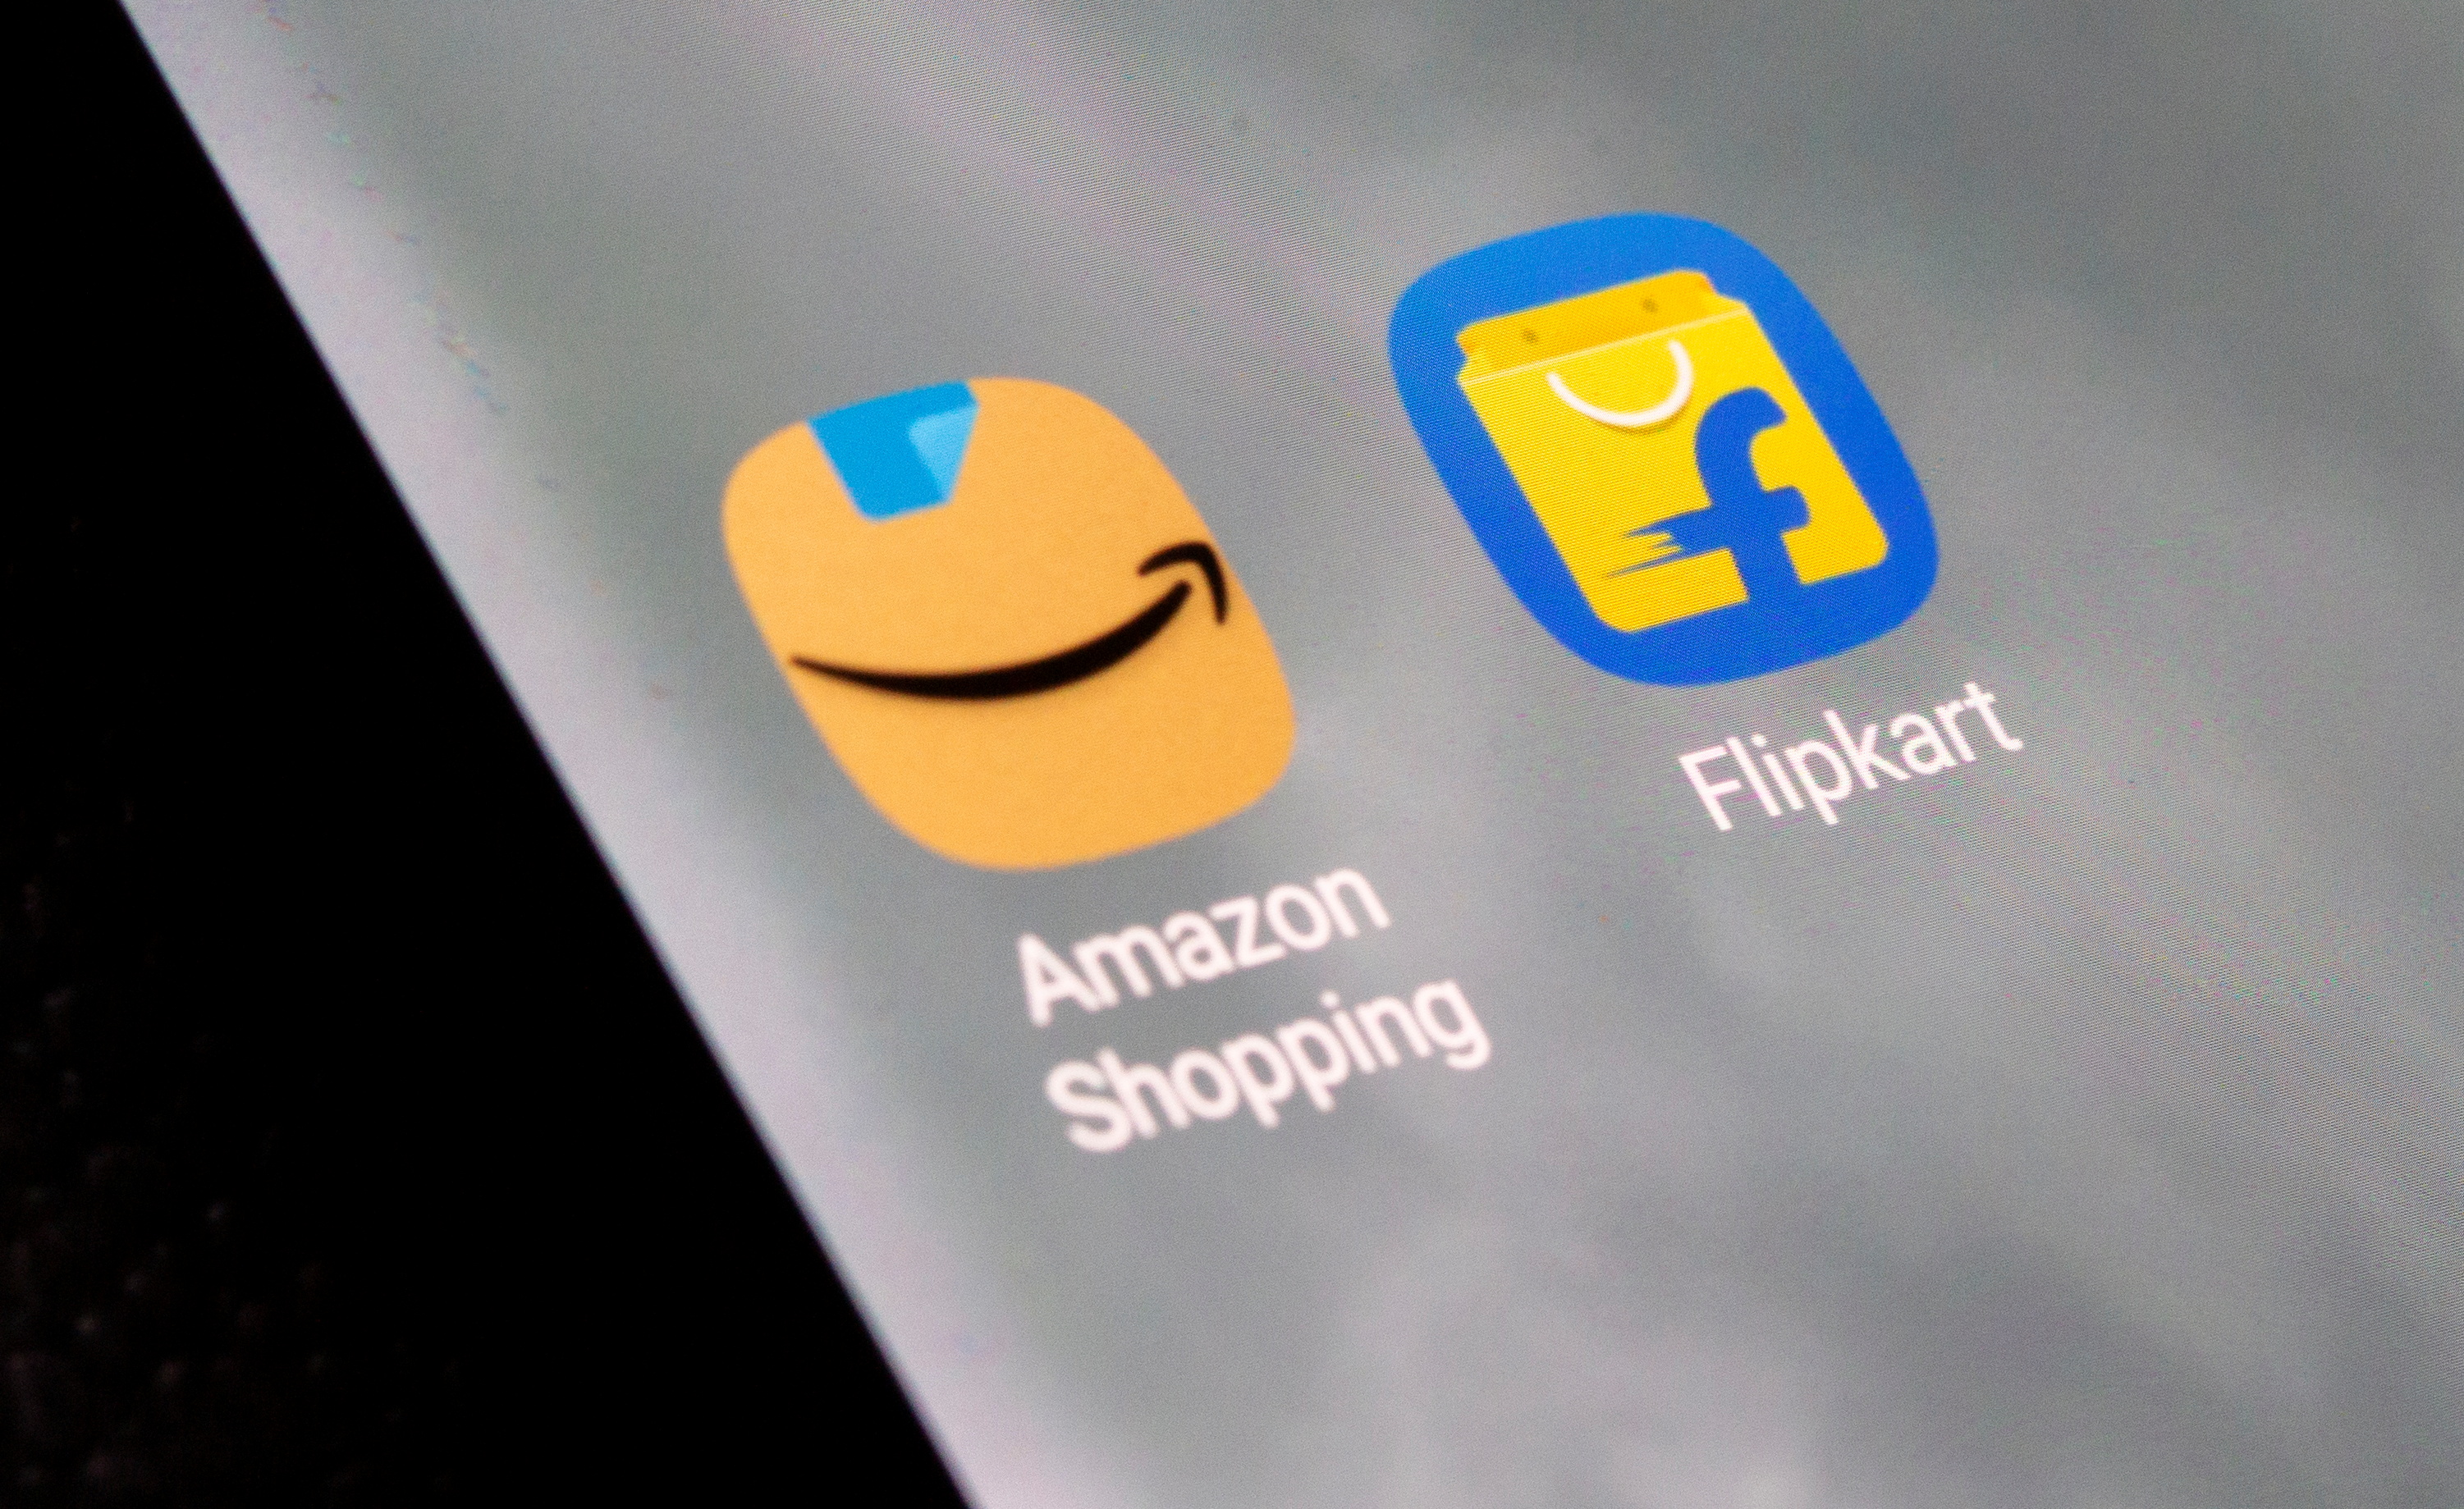 Amazon Shopping and Flipkart apps are seen on the smartphone in this illustration taken